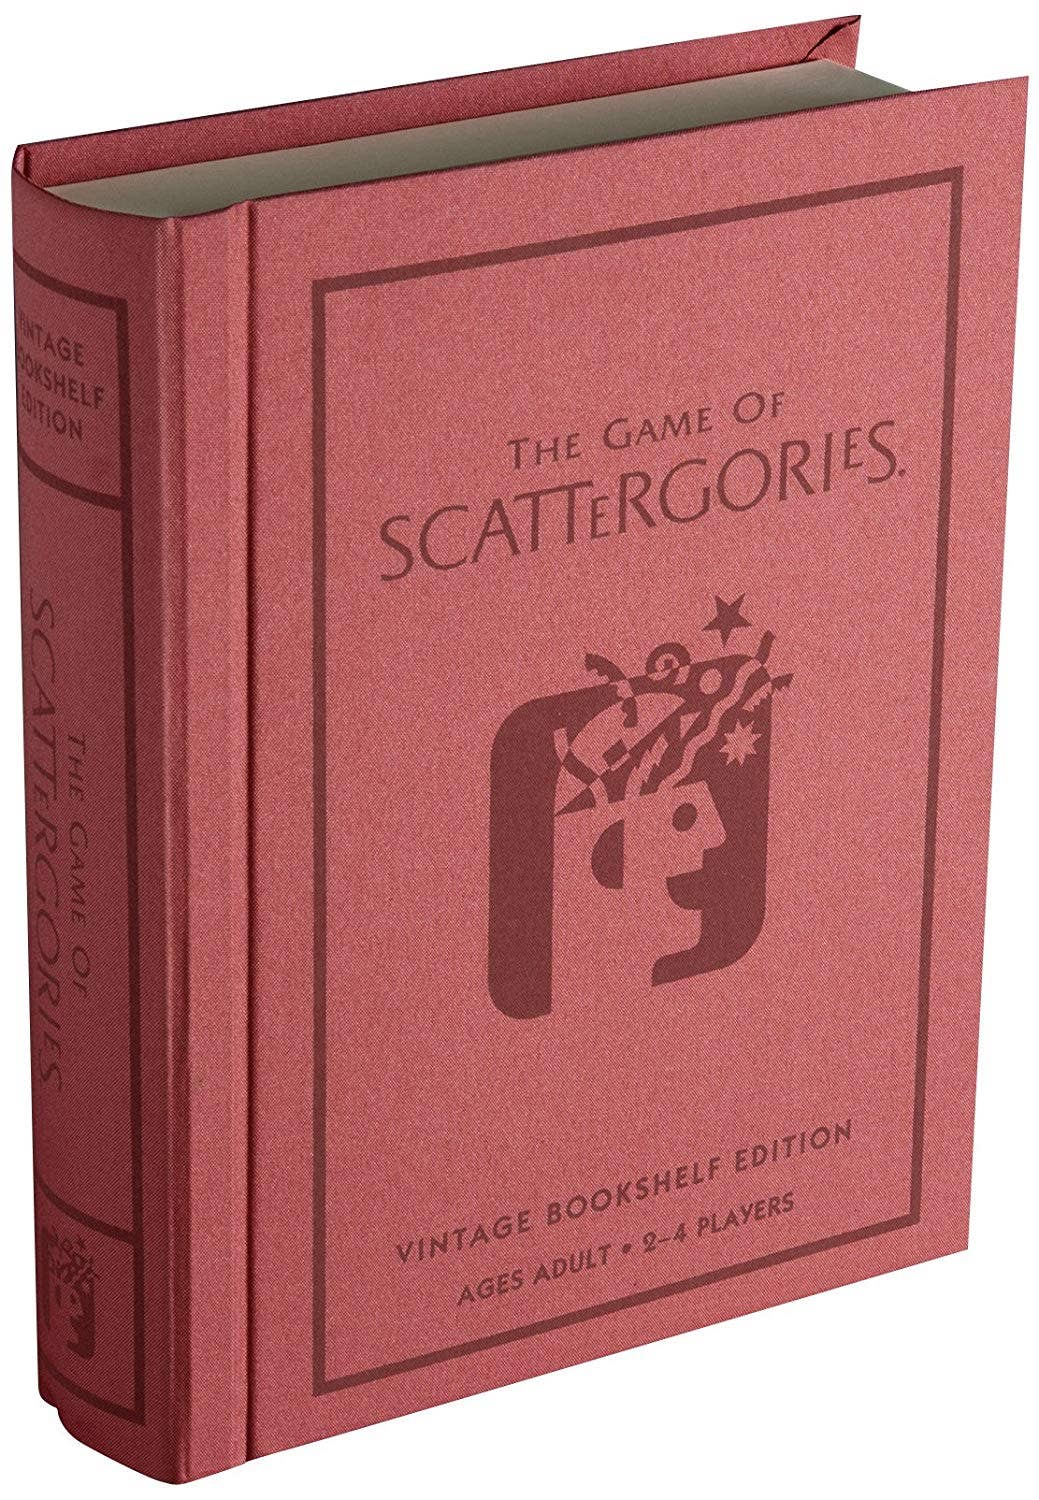 WS Game Company - WS Game Company Scattergories Vintage Bookshelf Edition - Bards & Cards